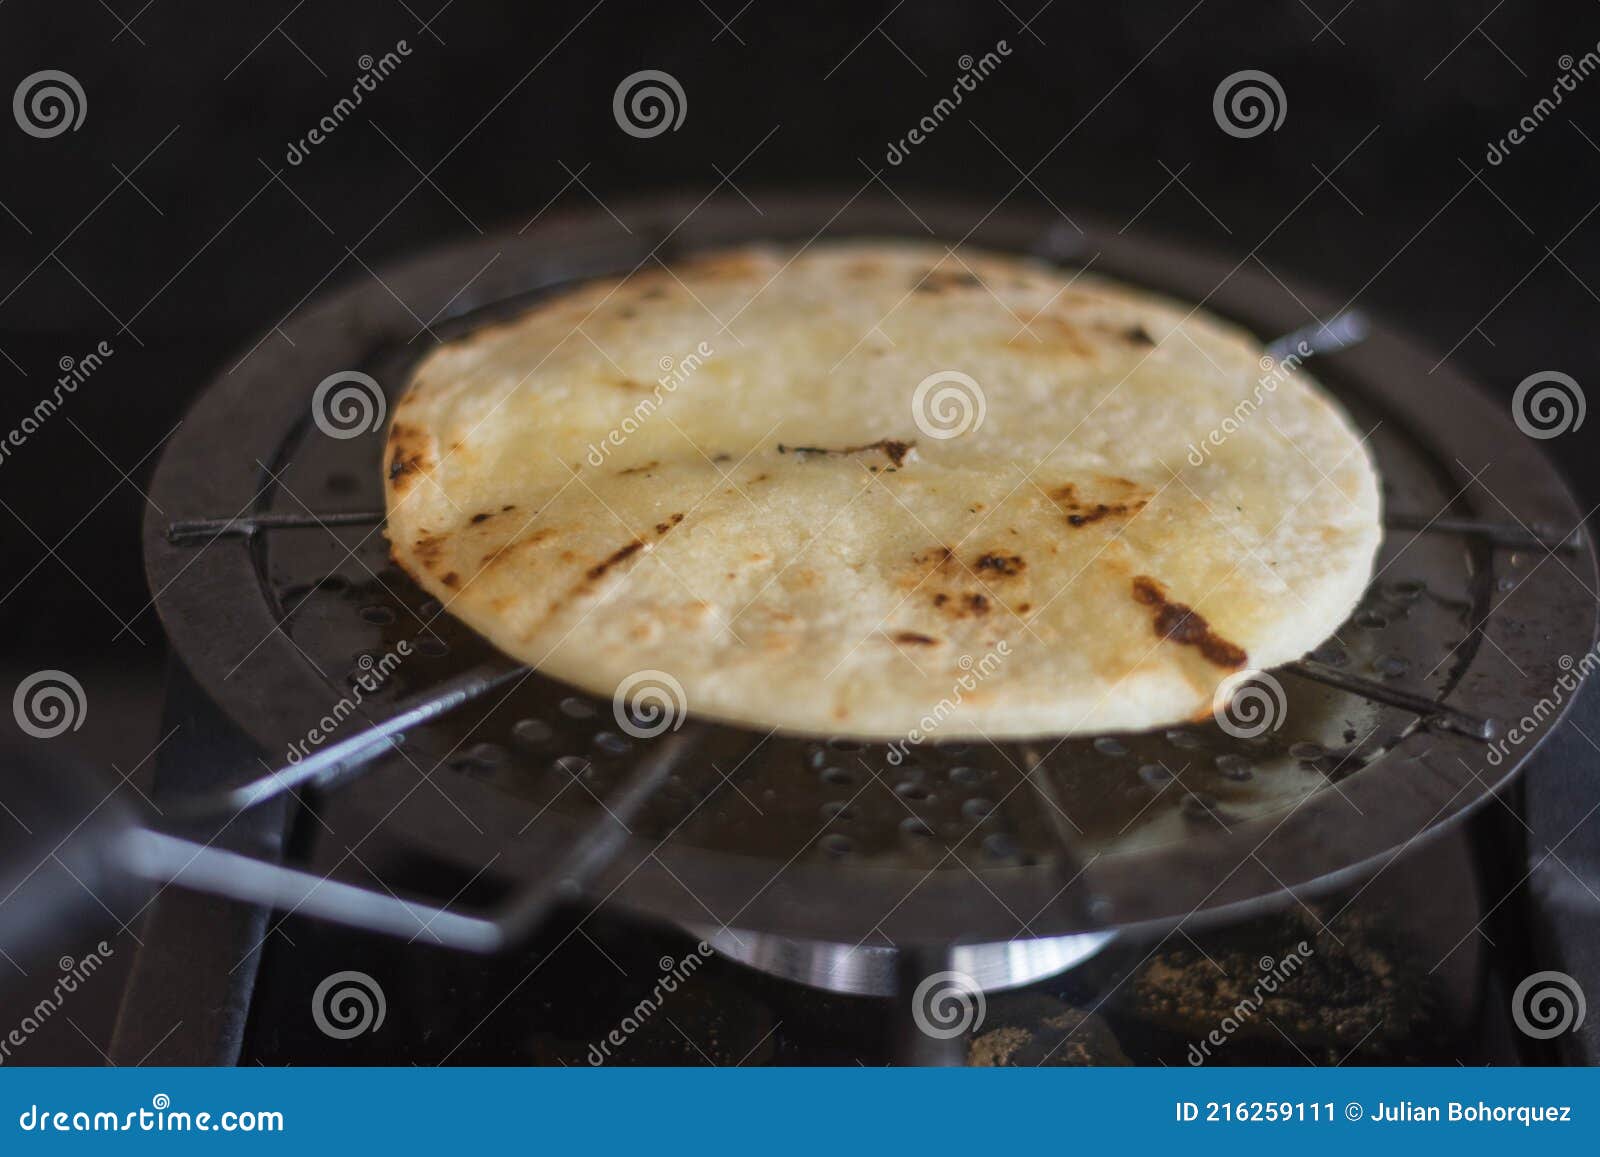 https://thumbs.dreamstime.com/z/toasting-colombian-arepa-grill-216259111.jpg